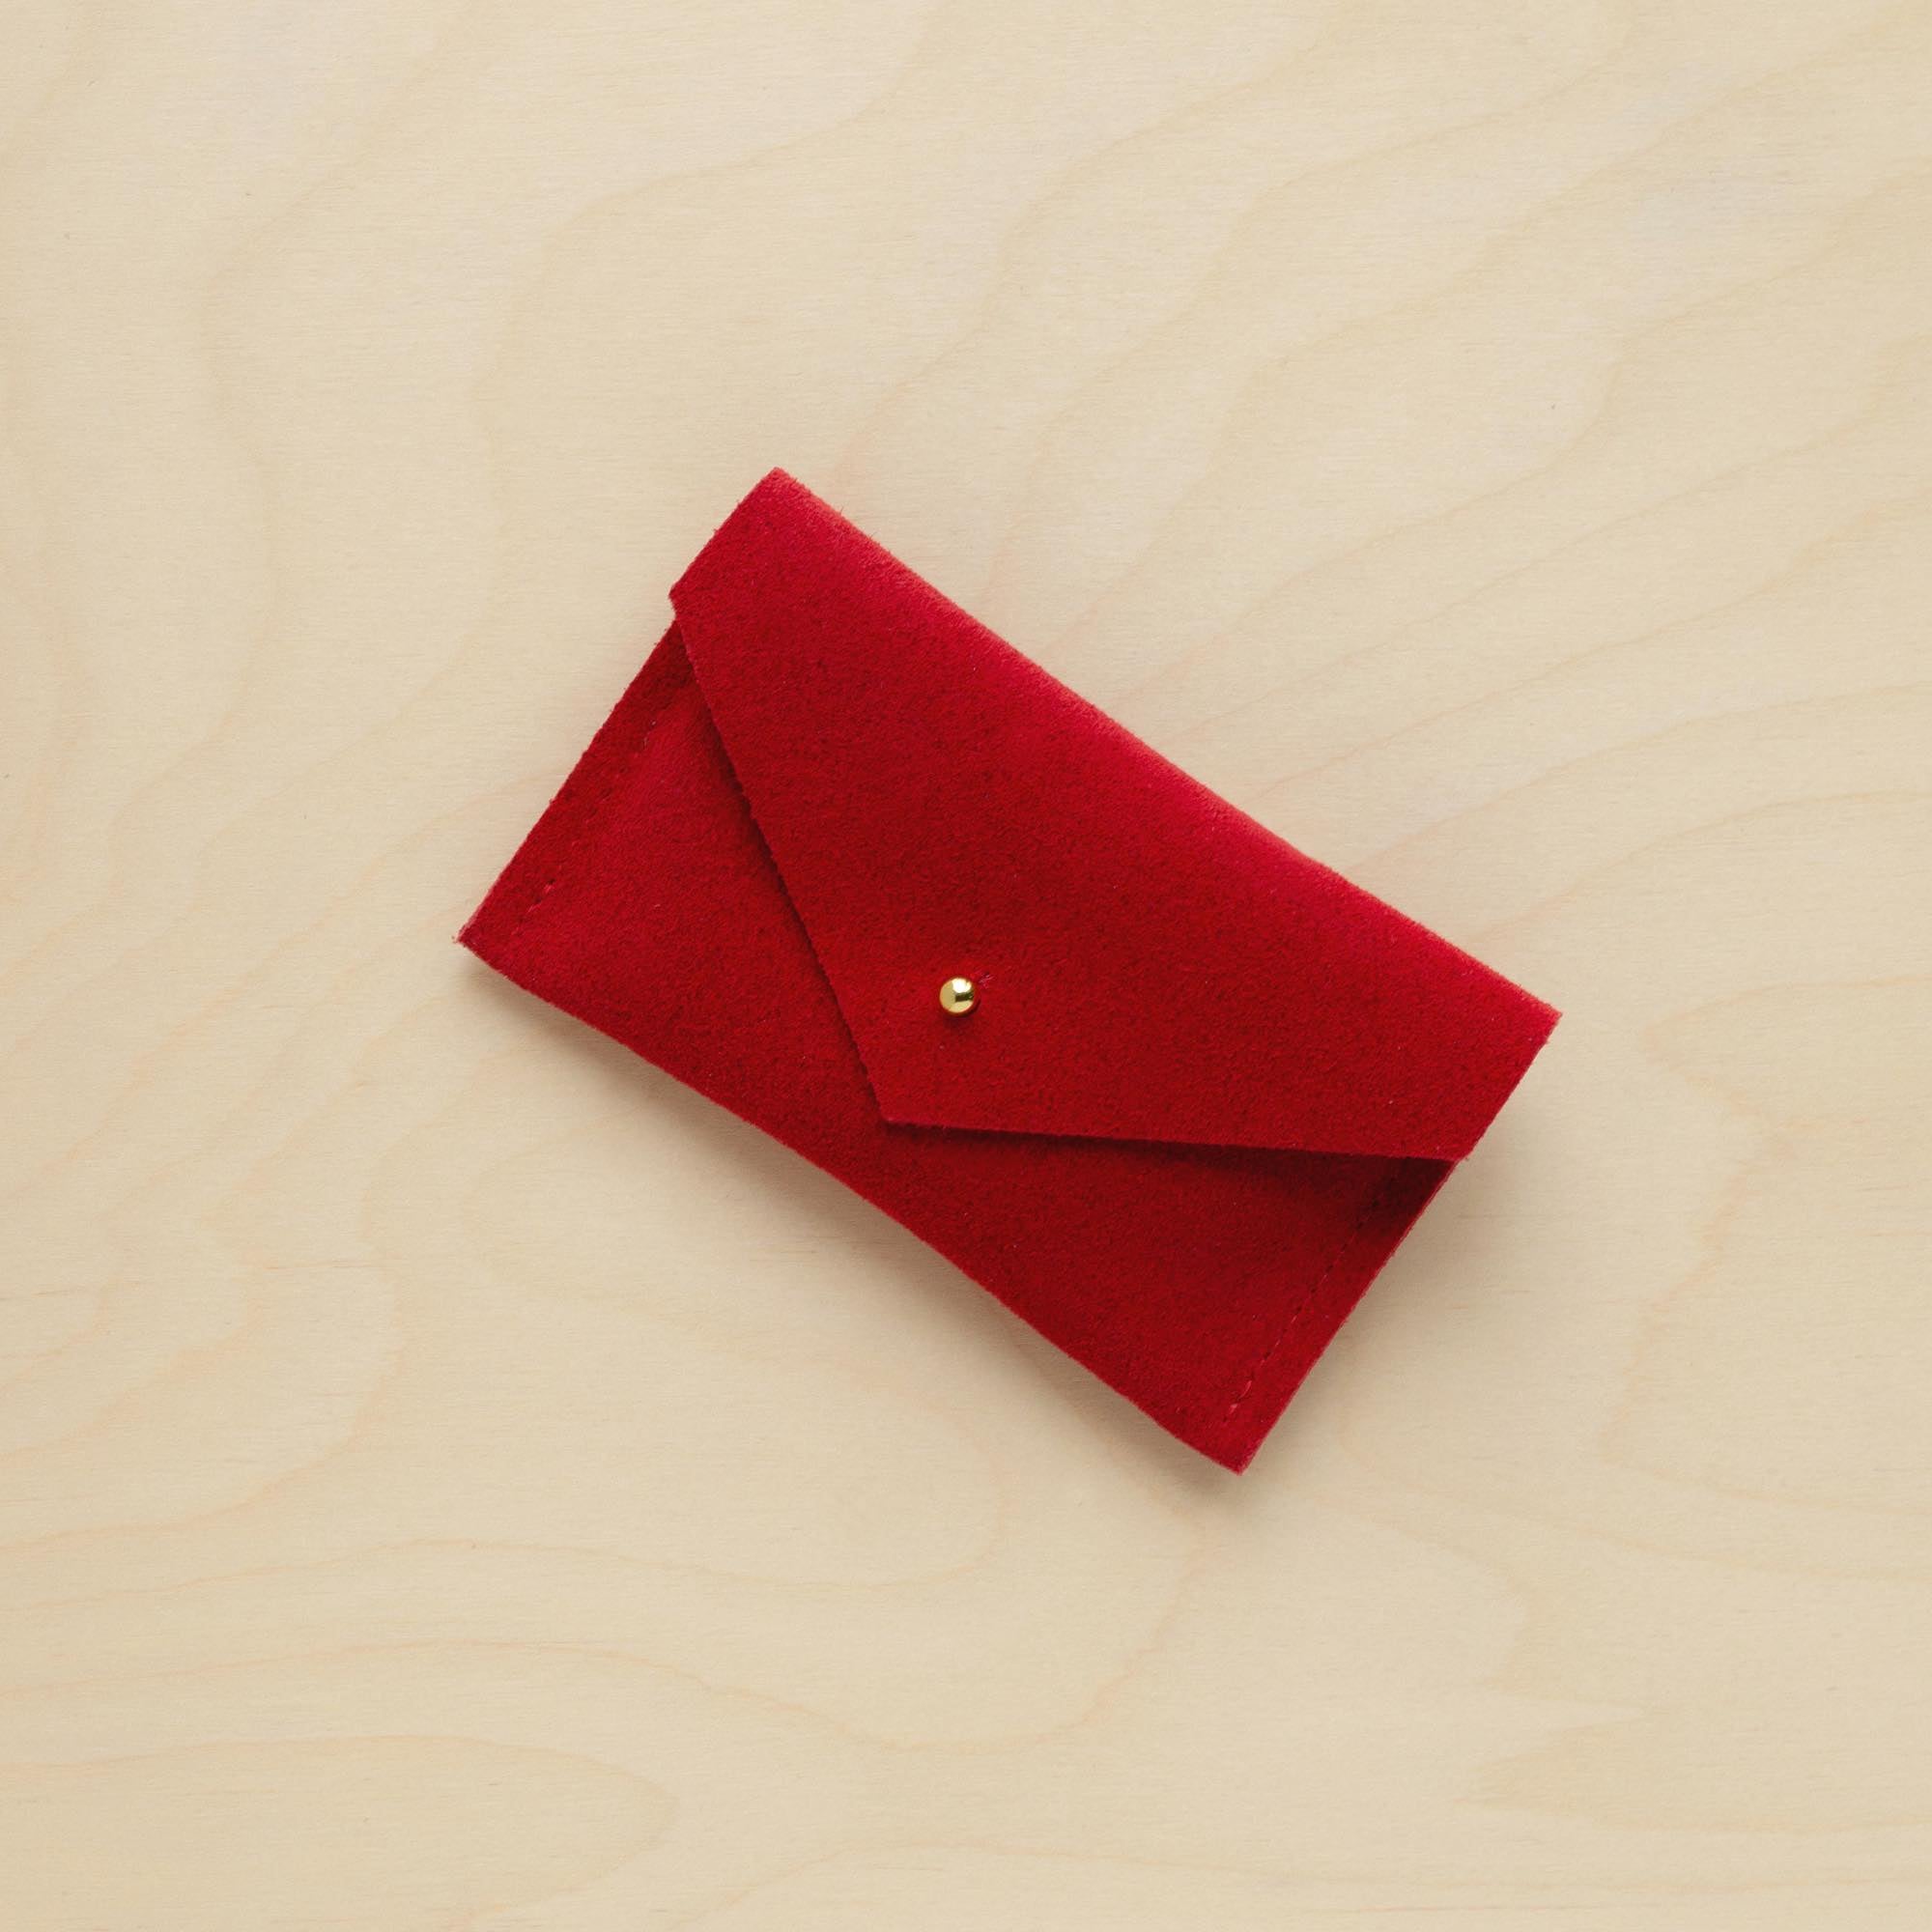 A suede Small Notions Pouch in Crimson Red. Complete with a stud for secure closing.